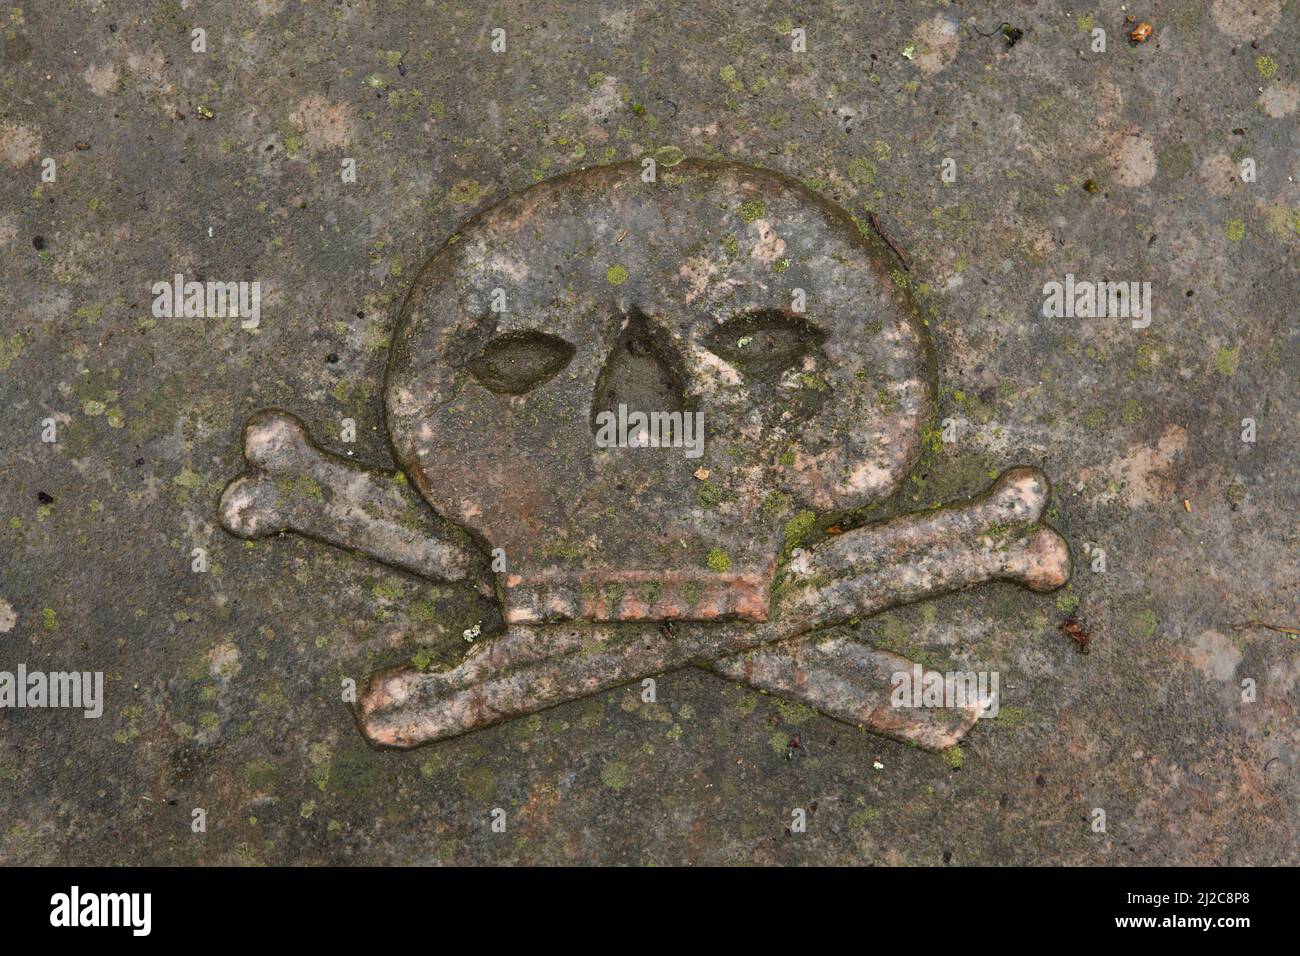 Skull and bones depicted in one of the graves at the Russian Cemetery next to the Russian Chapel of Alexandra Pavlovna in Üröm near Budapest, Hungary. Stock Photo